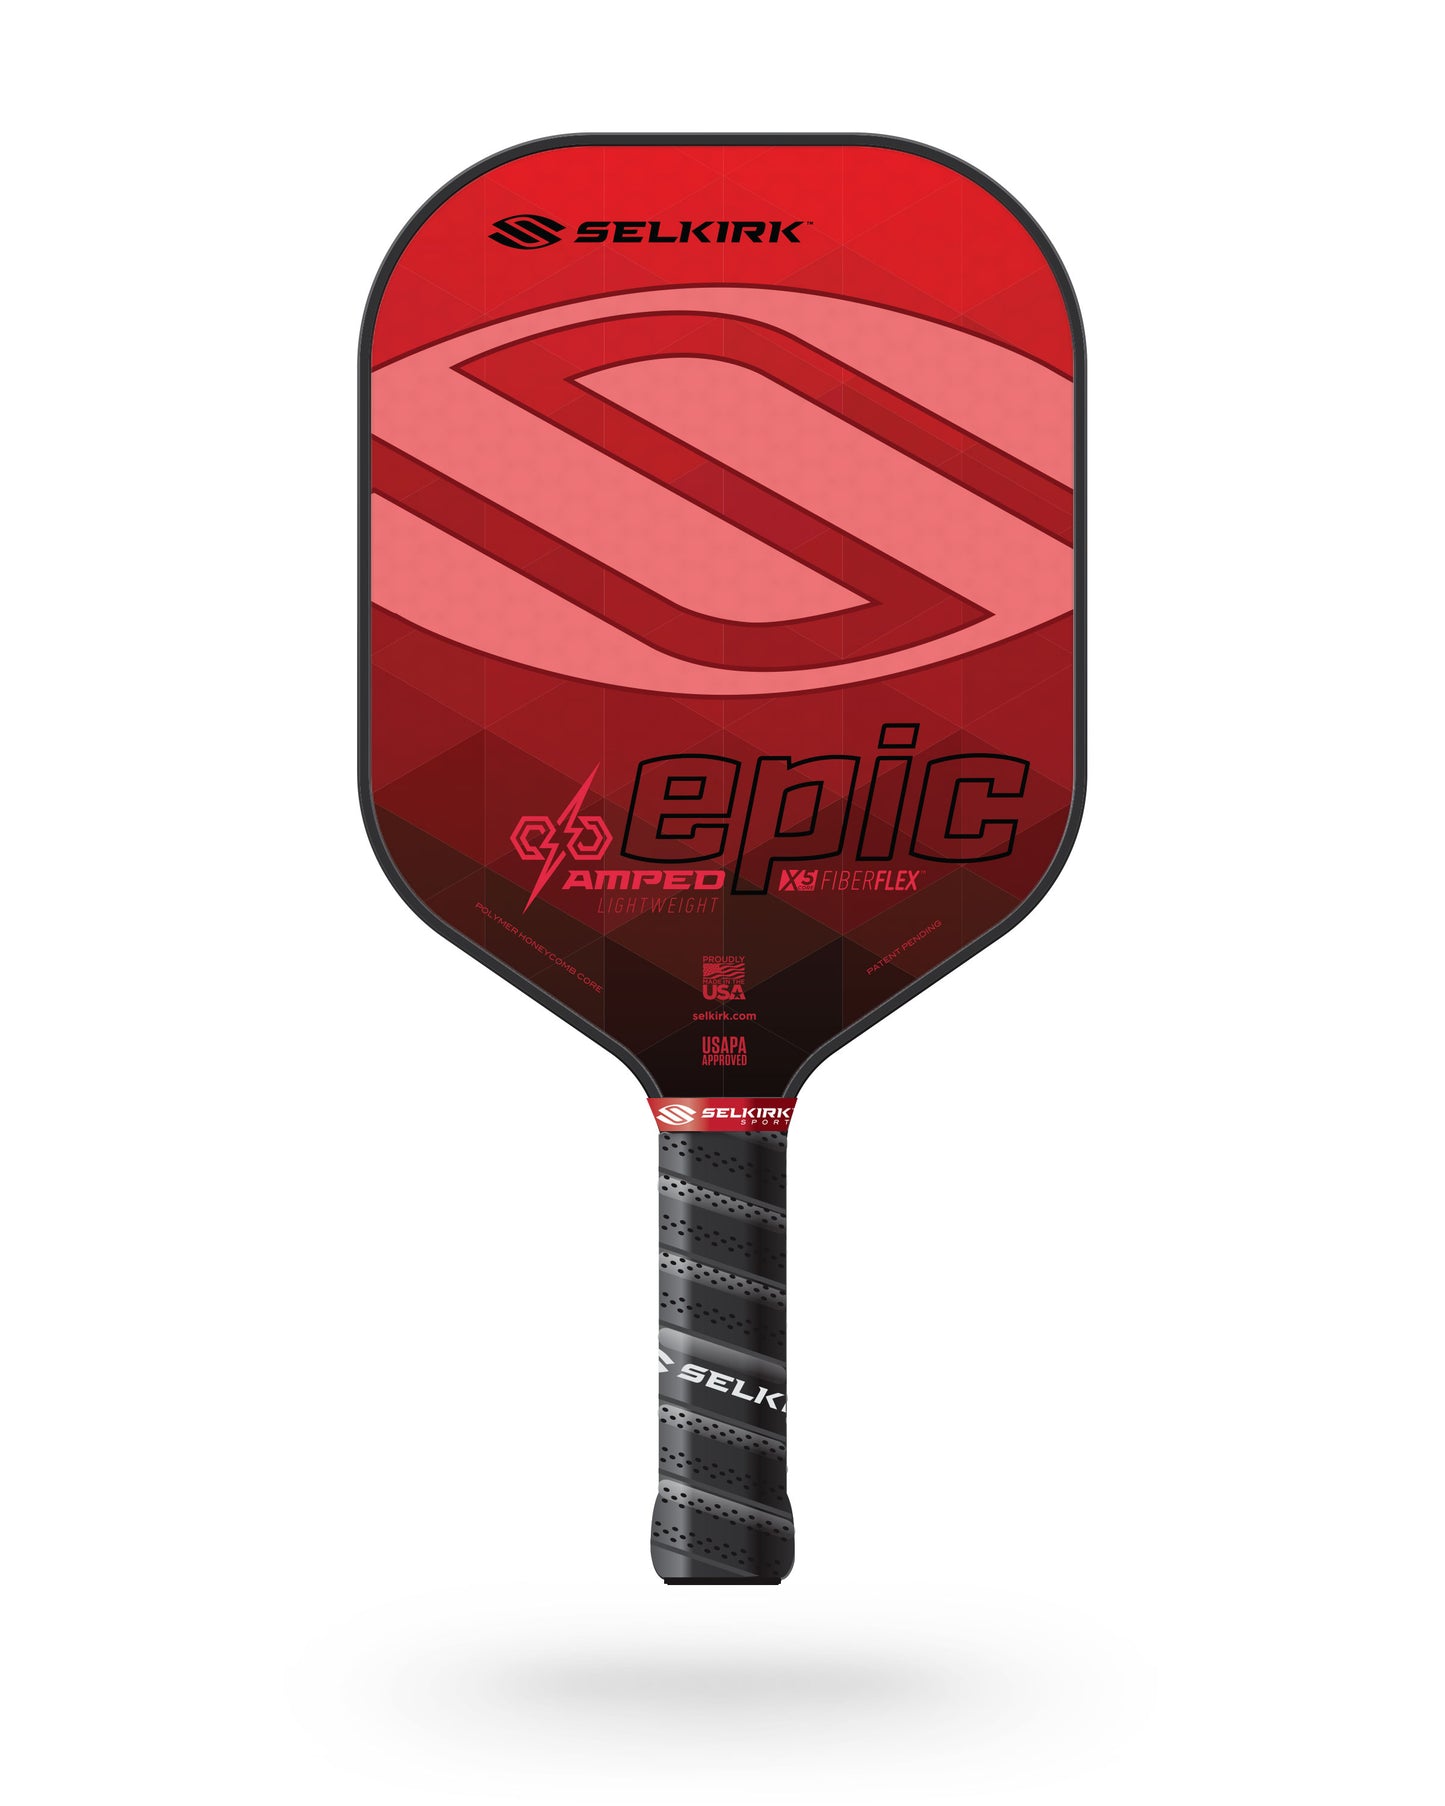 Selkirk AMPED Epic pickleball paddle in red and pink